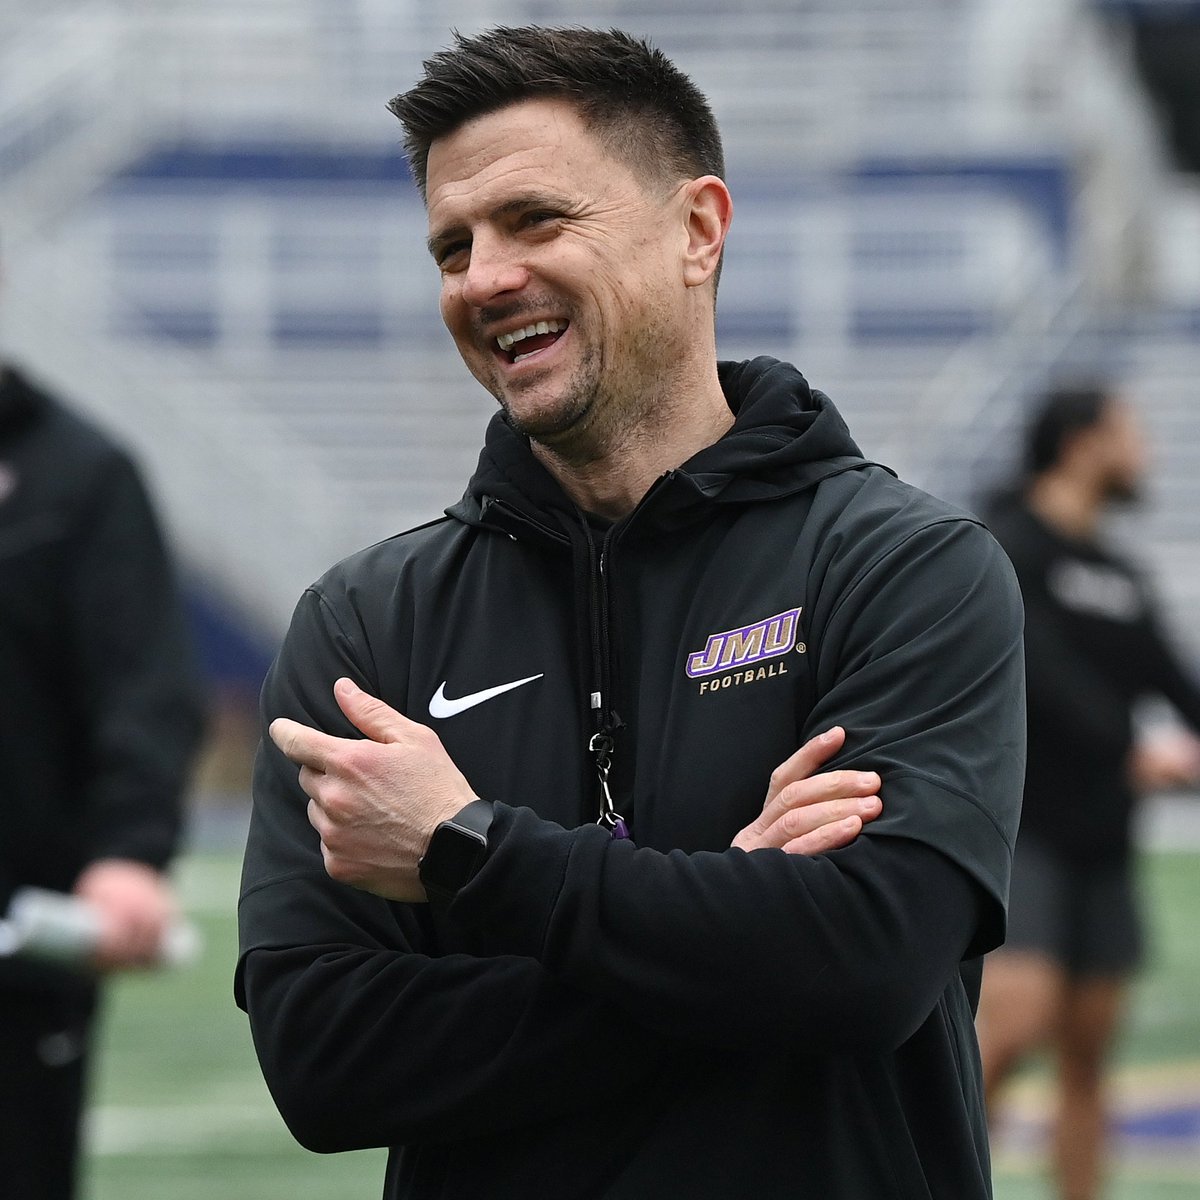 I went 1-on-1 with James Madison head football coach Bob Chesney after practice Tuesday to get an update on how spring ball has gone for his team. The spring game will kick off Saturday at 2:30 p.m. inside Bridgeforth. 🔊 on.soundcloud.com/xNT8q6hN47aoxP… @JMUFootball | @CoachBobChesney